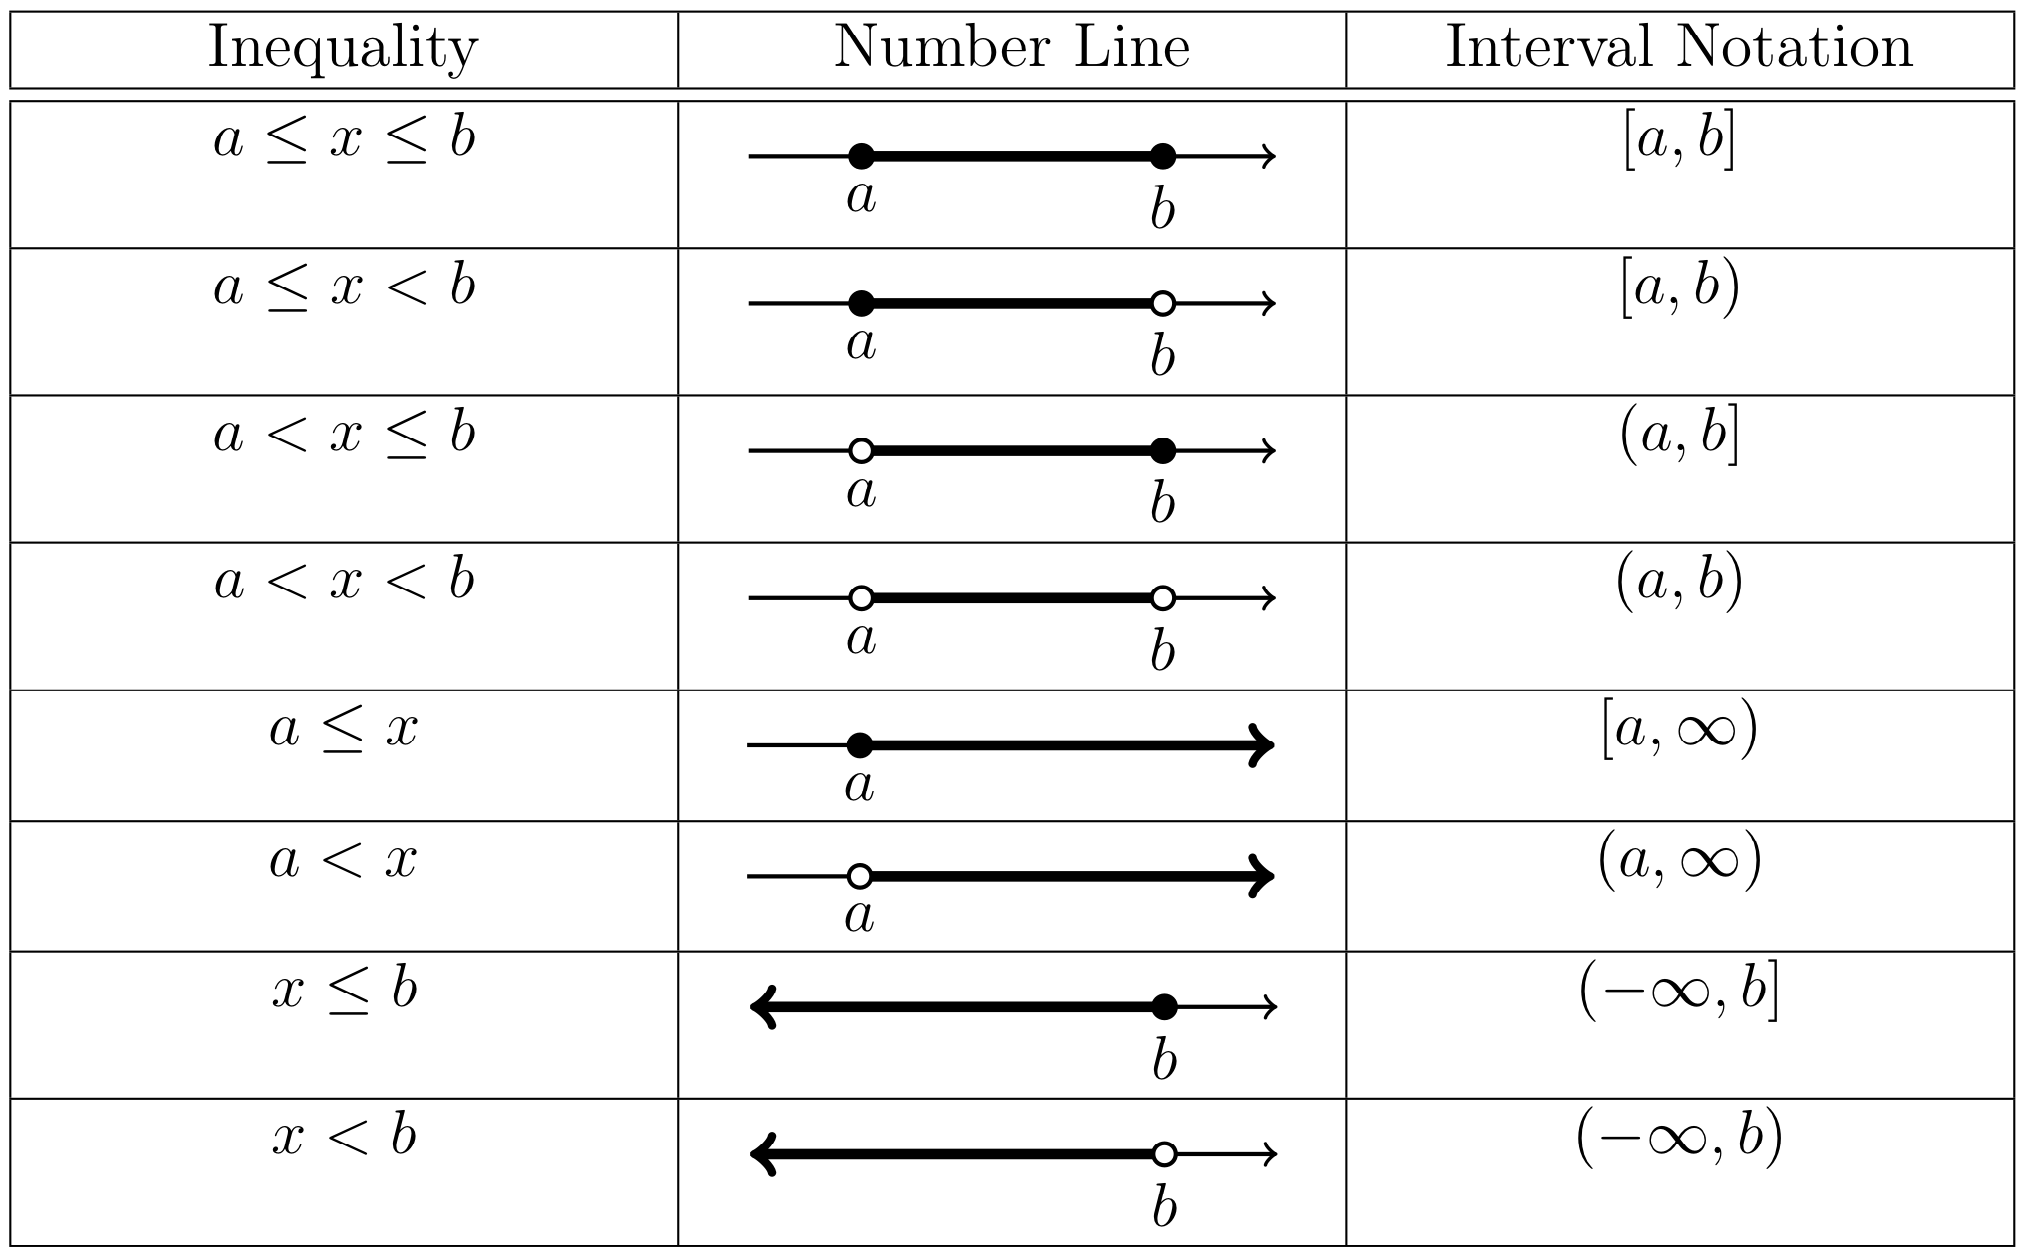 Table of interval types